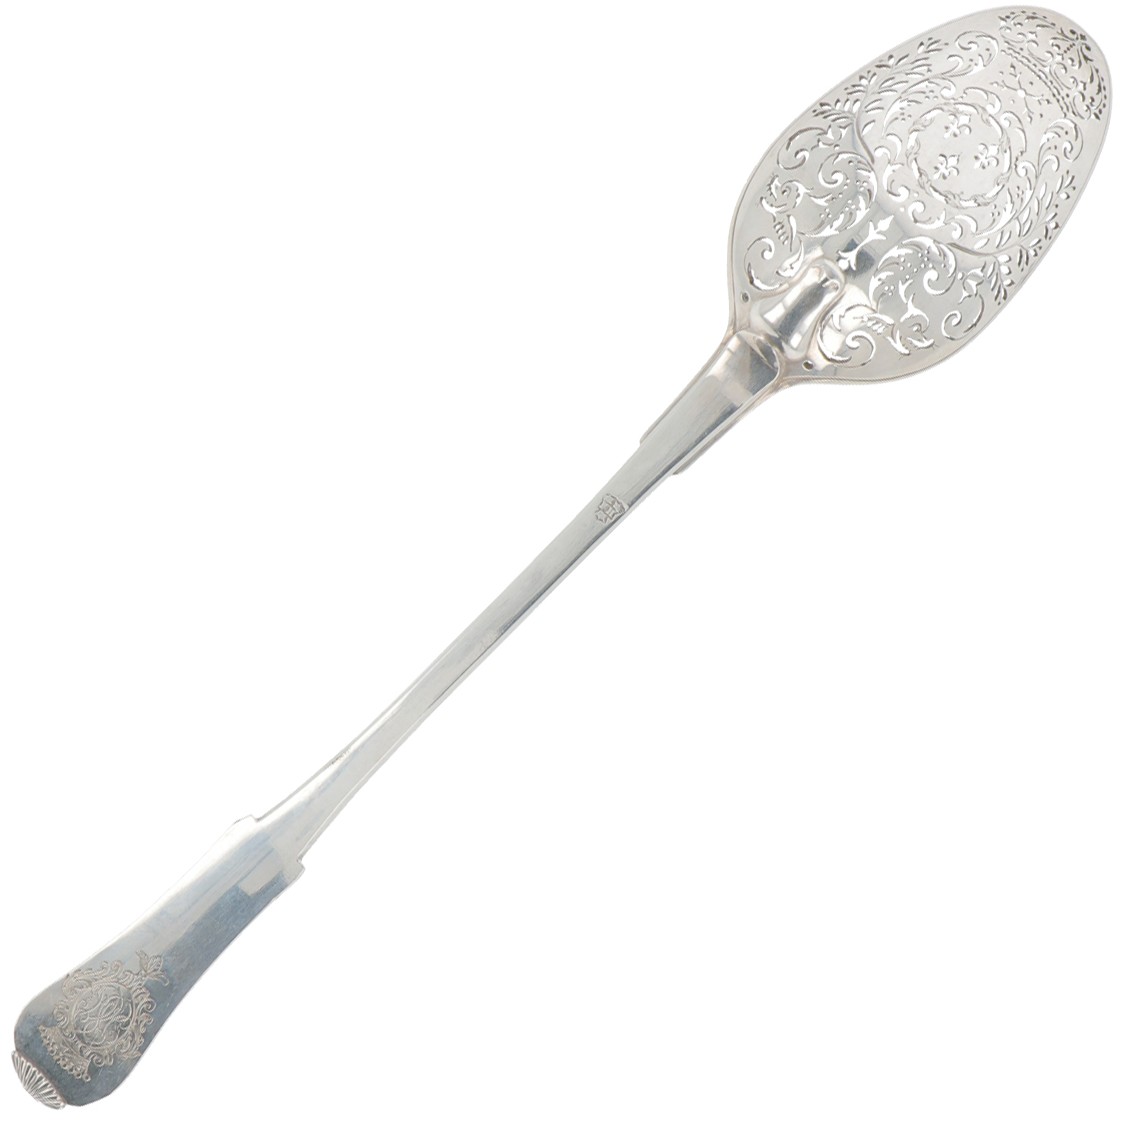 Wet fruit spoon silver. - Image 2 of 5